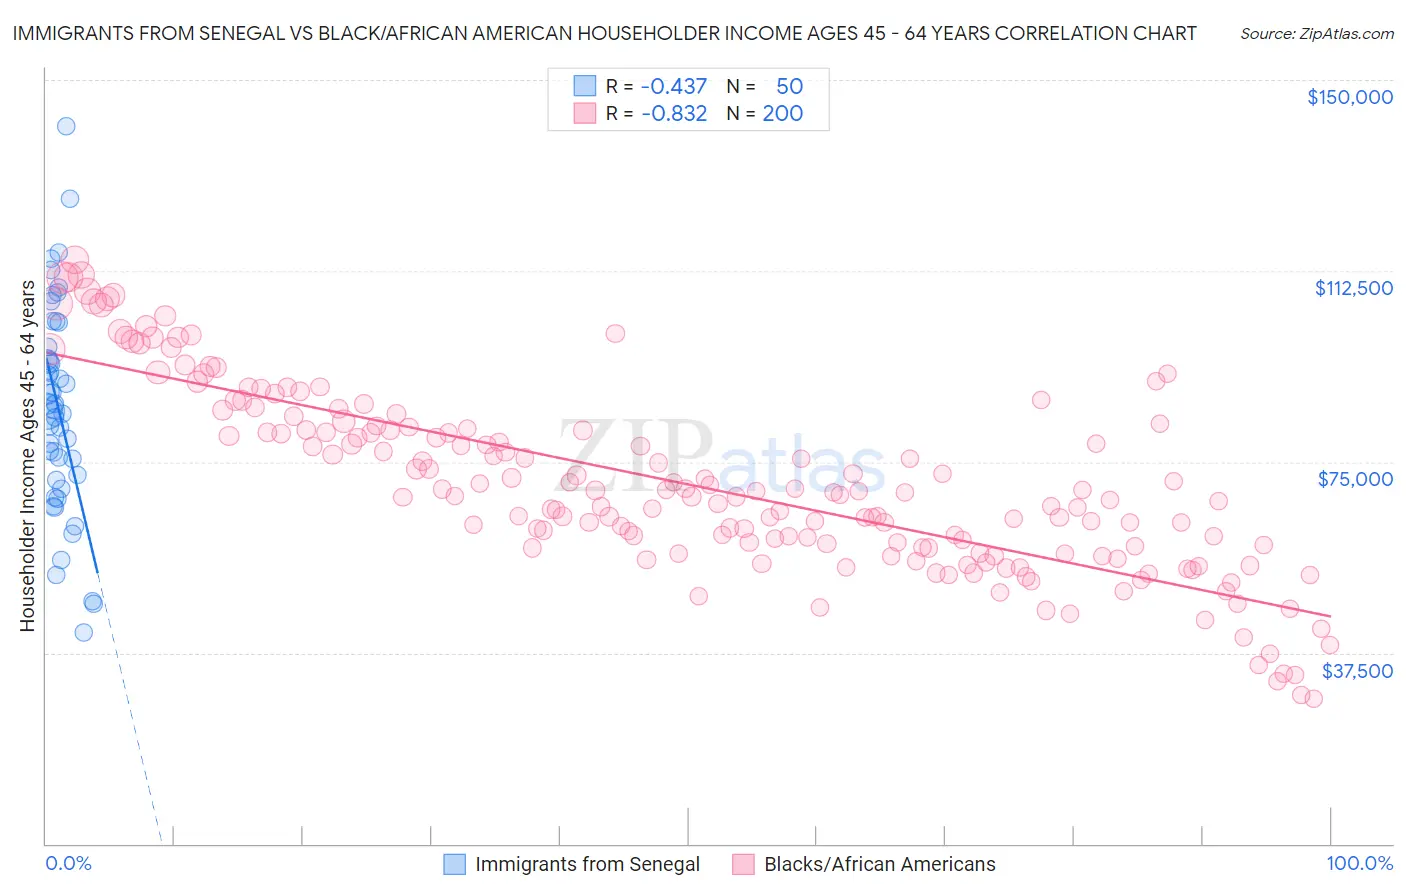 Immigrants from Senegal vs Black/African American Householder Income Ages 45 - 64 years